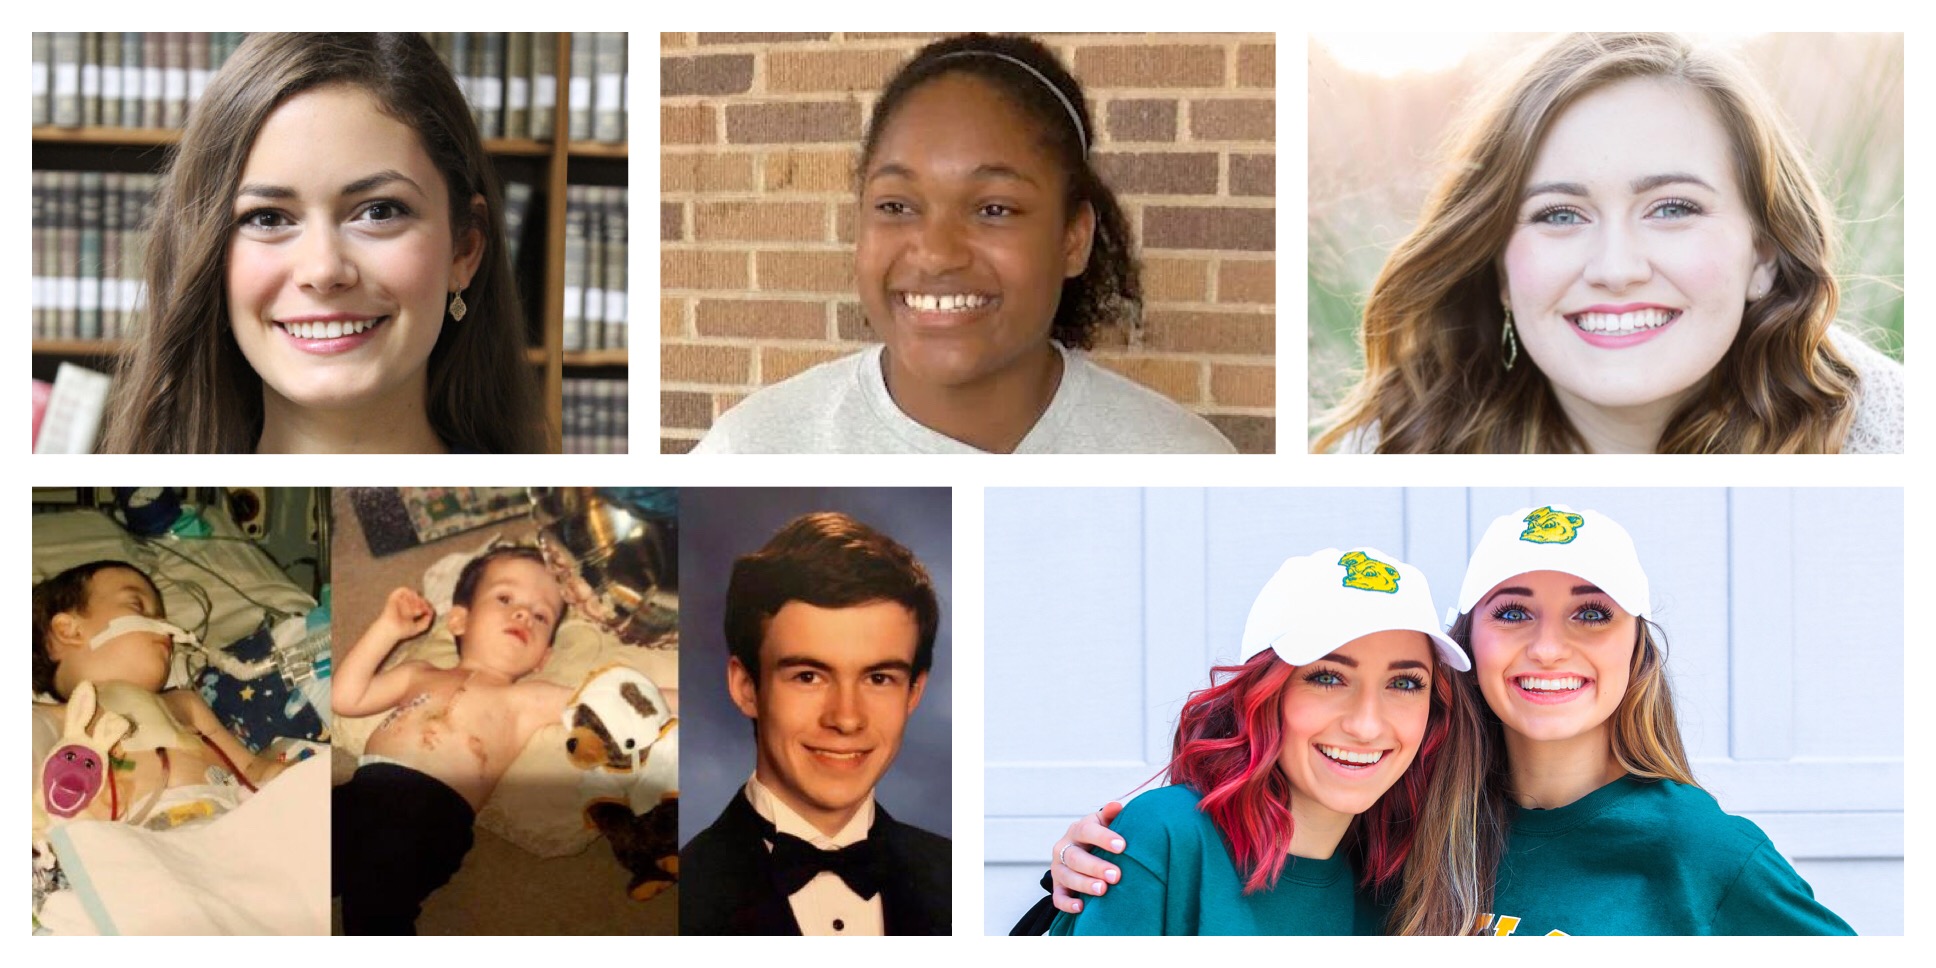 Faces of Baylor's Class of 2022 